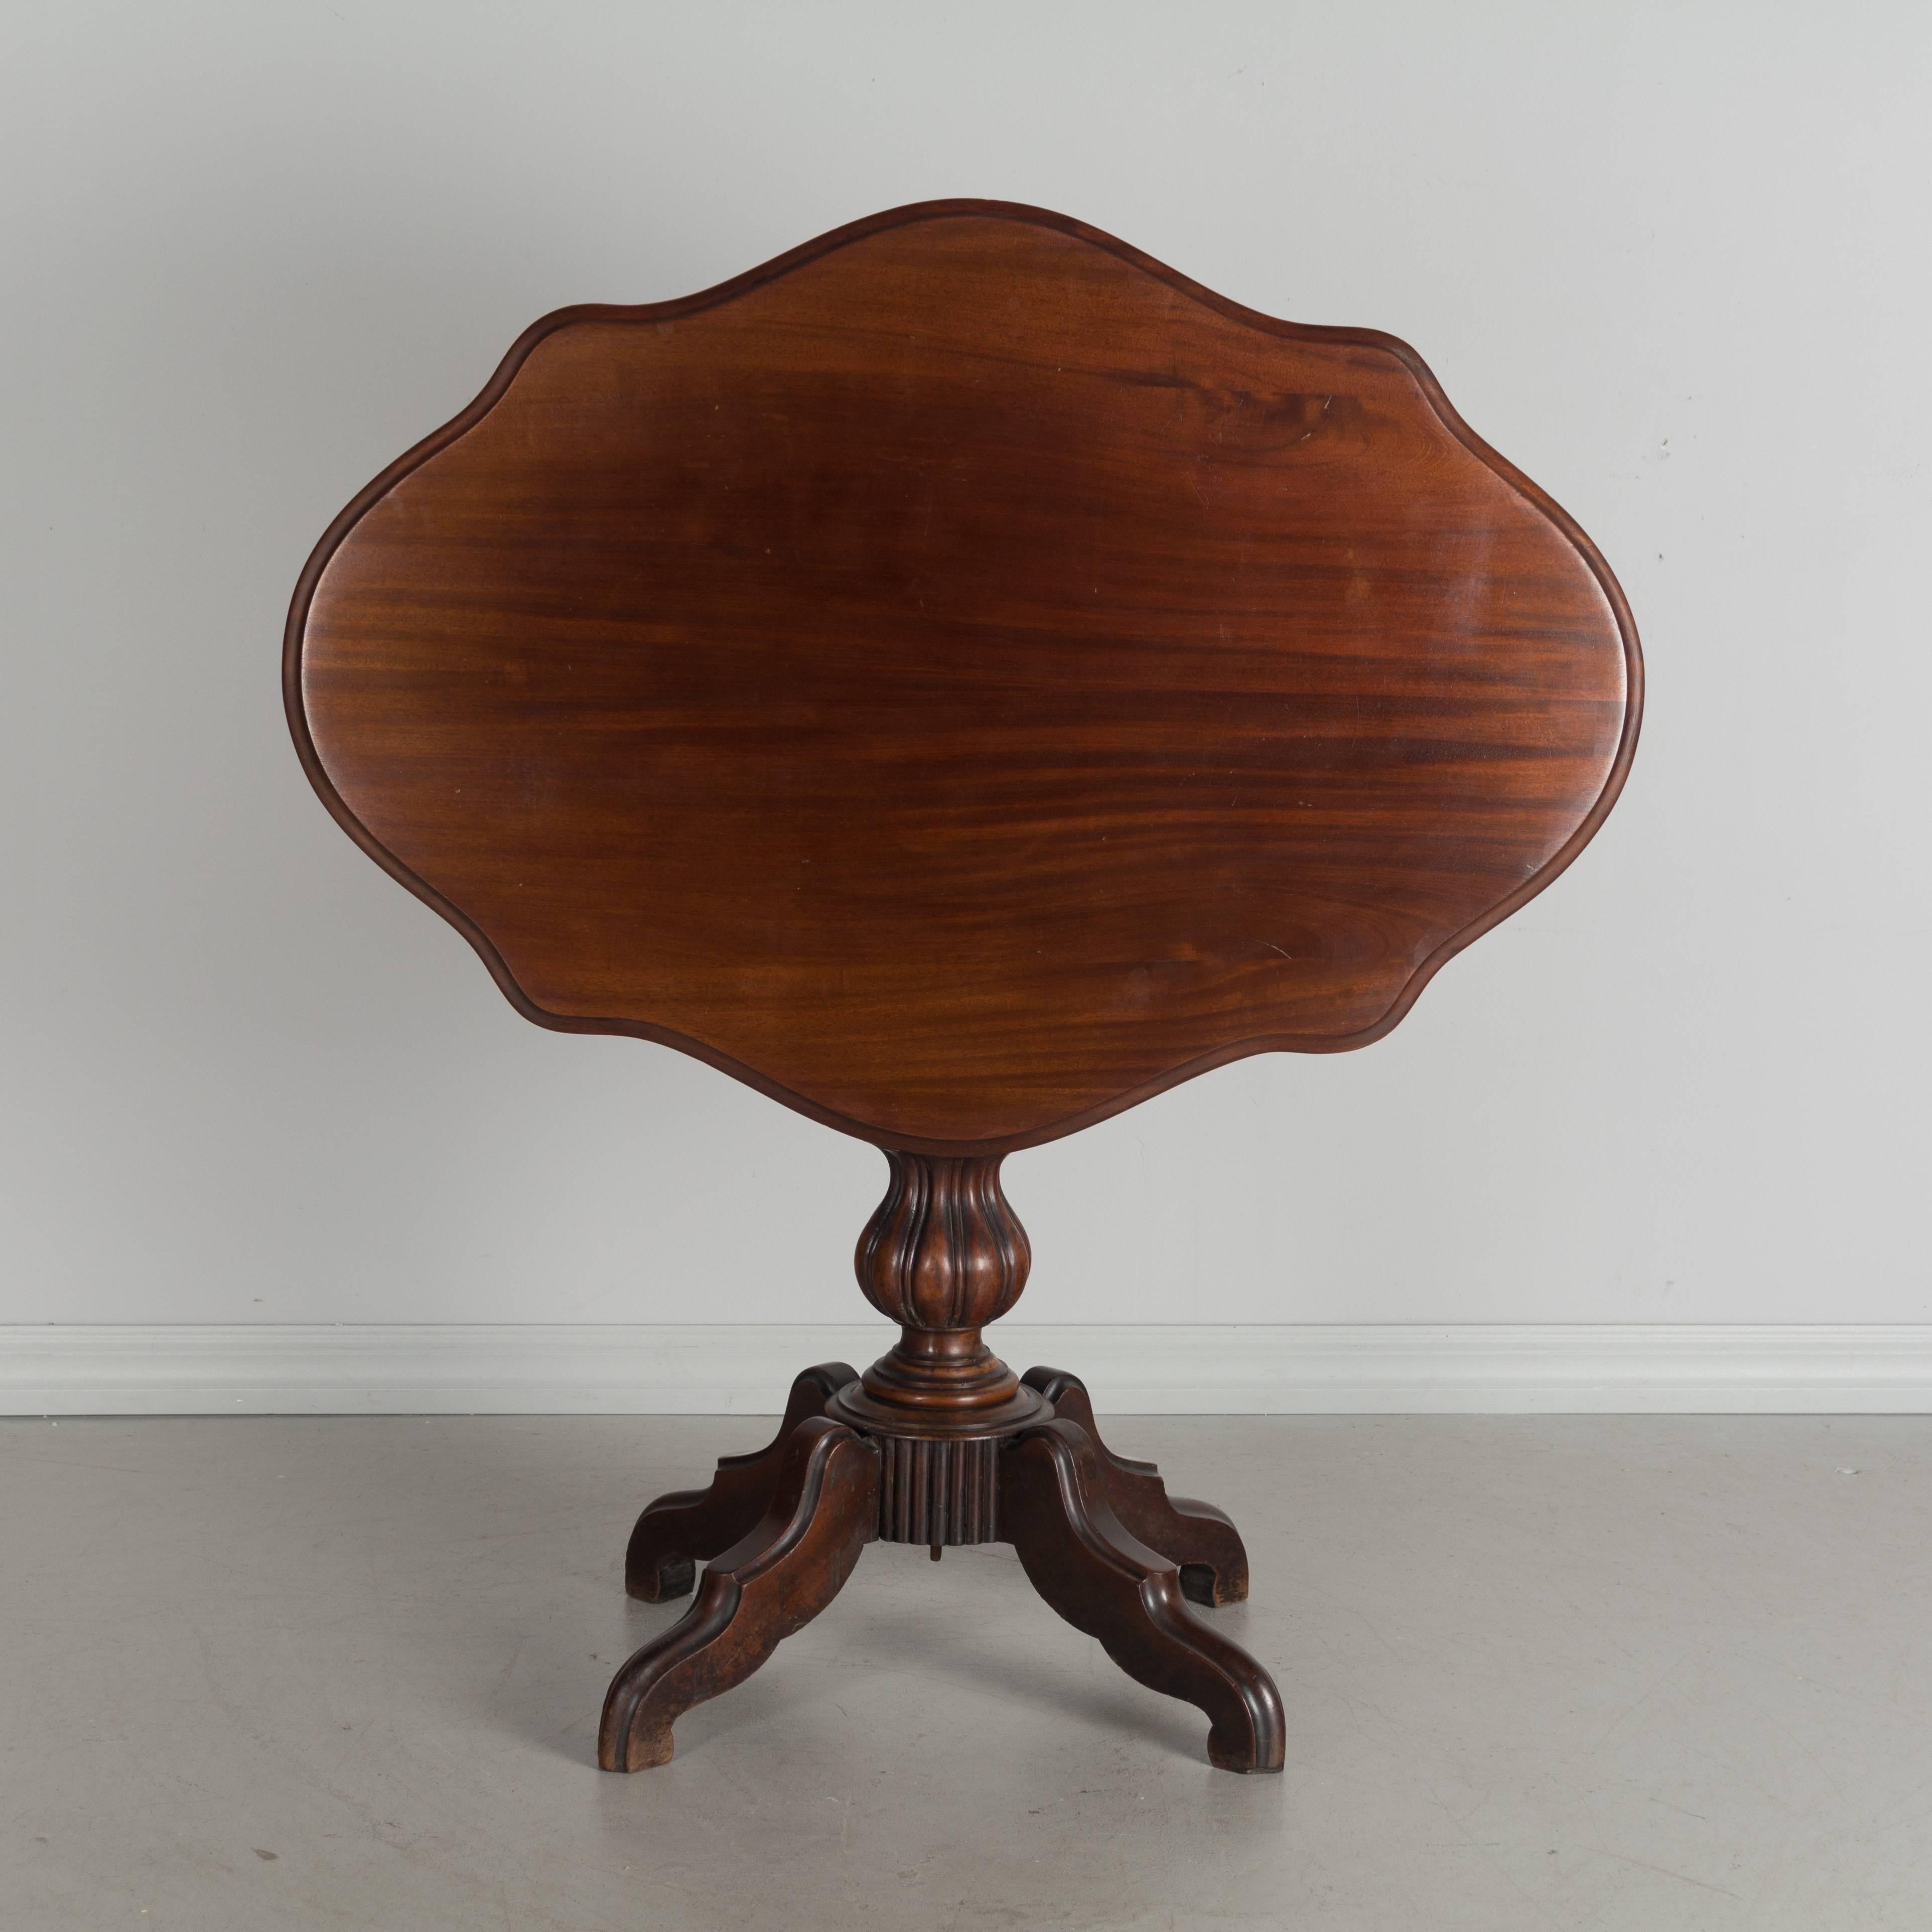 A 19th century, Louis Philippe style gueridon or title-top table made of solid mahogany. Shaped oval top with turned and carved pedestal base. Measures: 45" H when top is tilted up.
More photos available upon request. We have a large selection